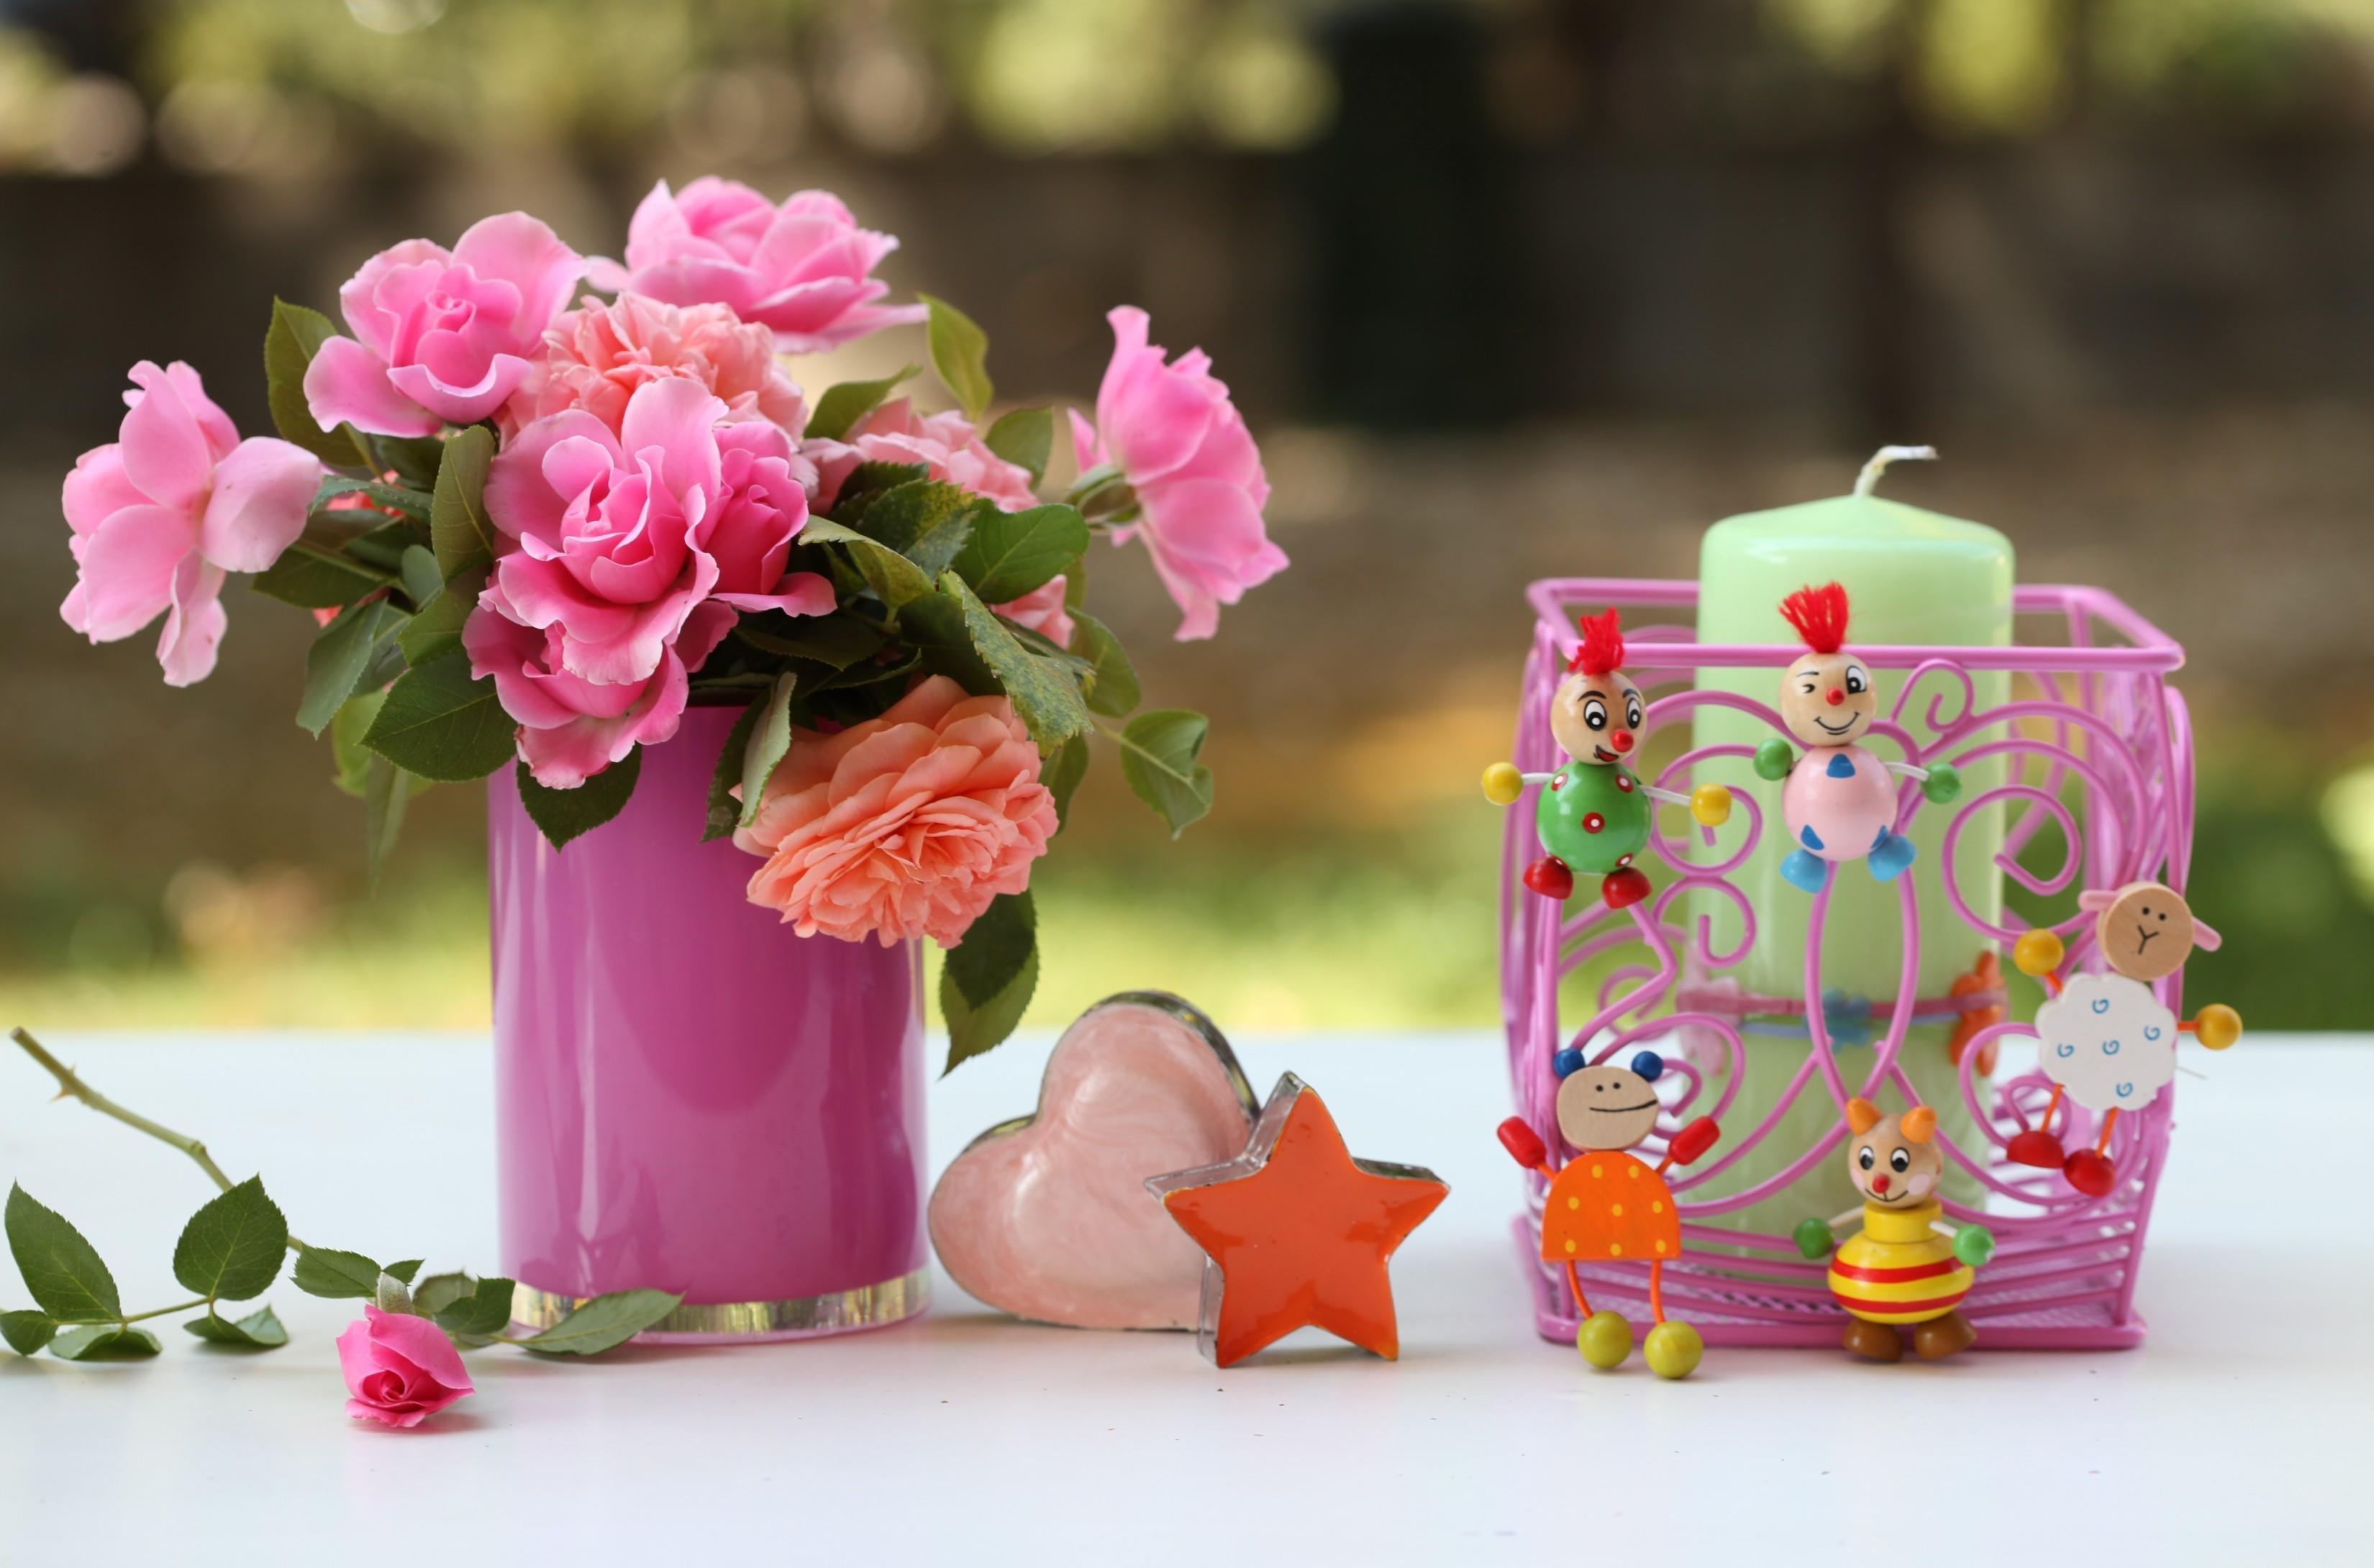 vase, candles, roses, flowers, toys, heart, star 2160p